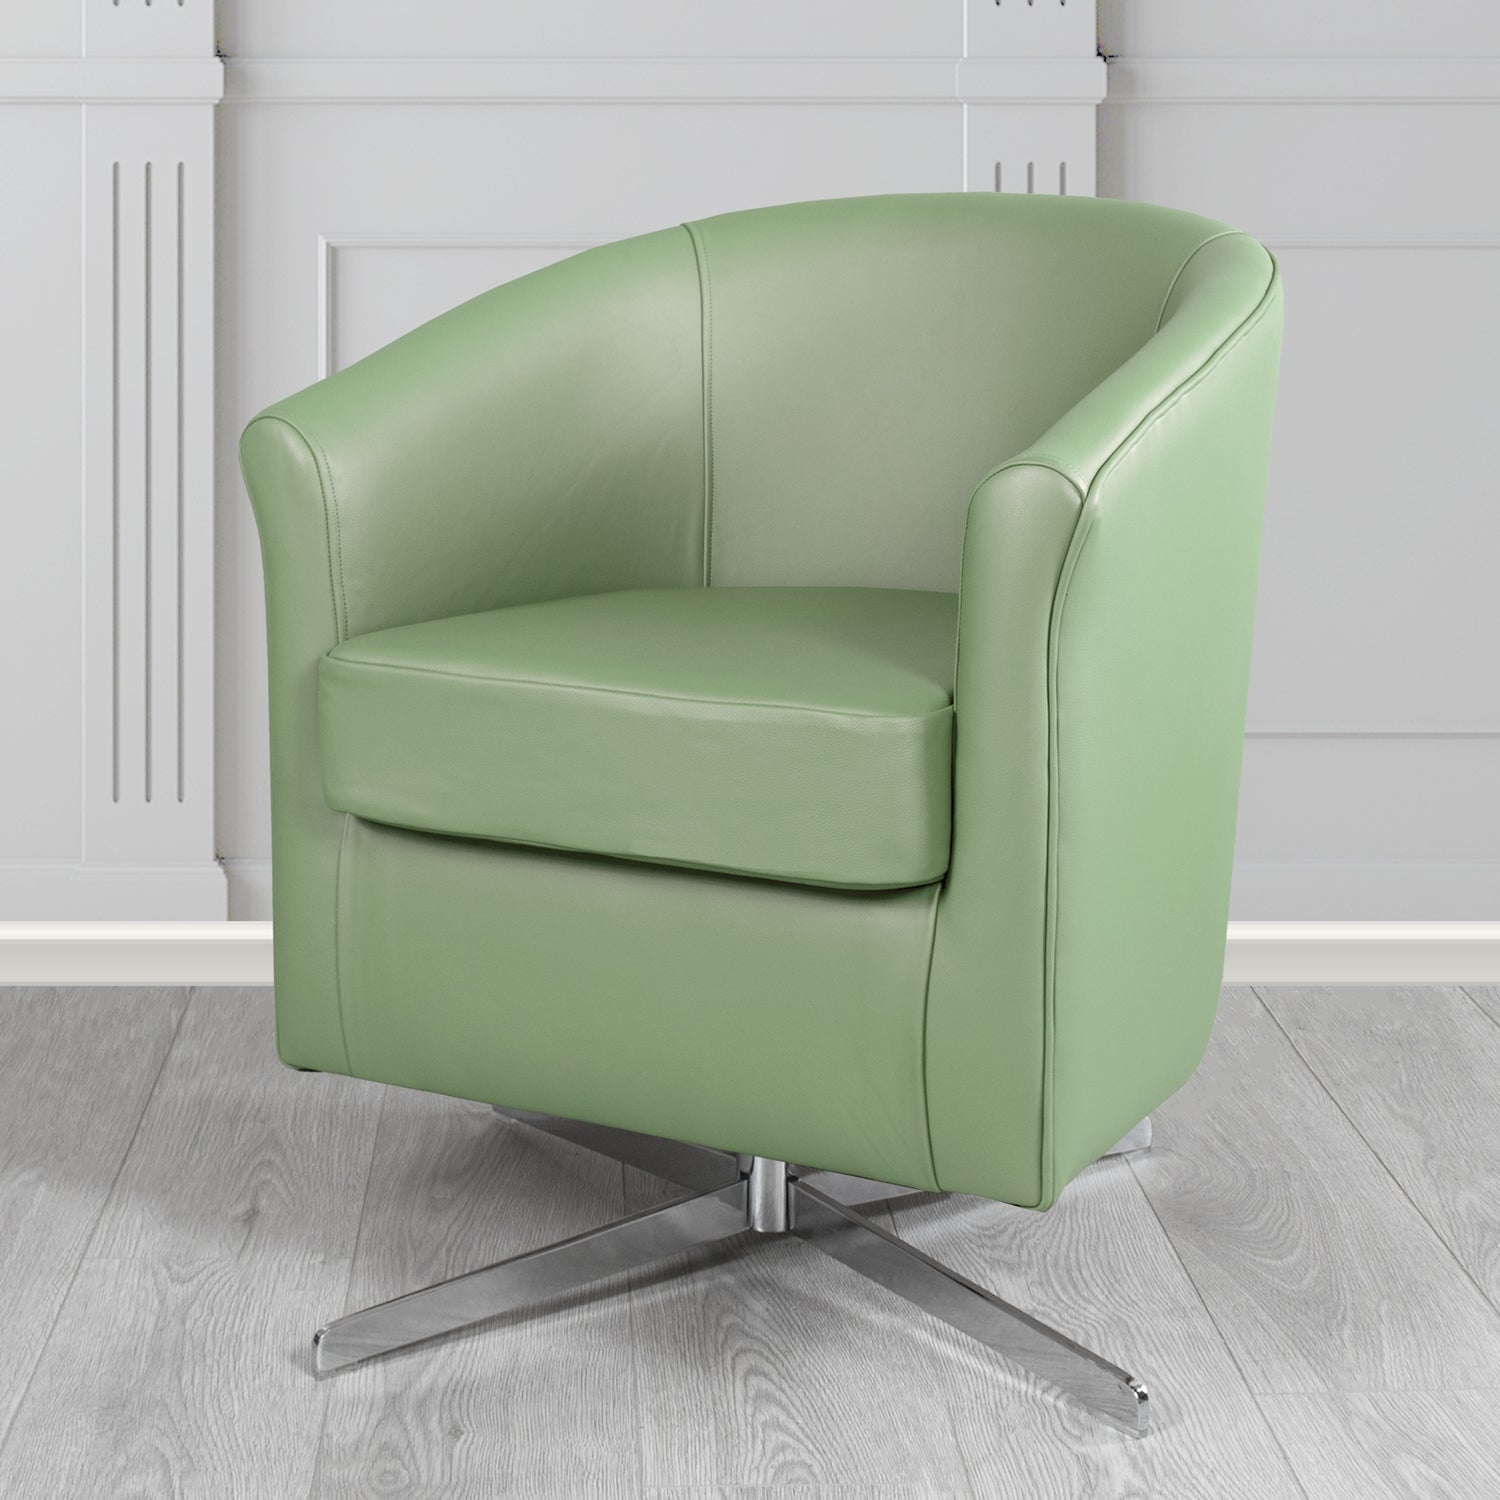 Cannes Swivel Tub Chair in Shelly Thyme Green Crib 5 Genuine Leather - The Tub Chair Shop